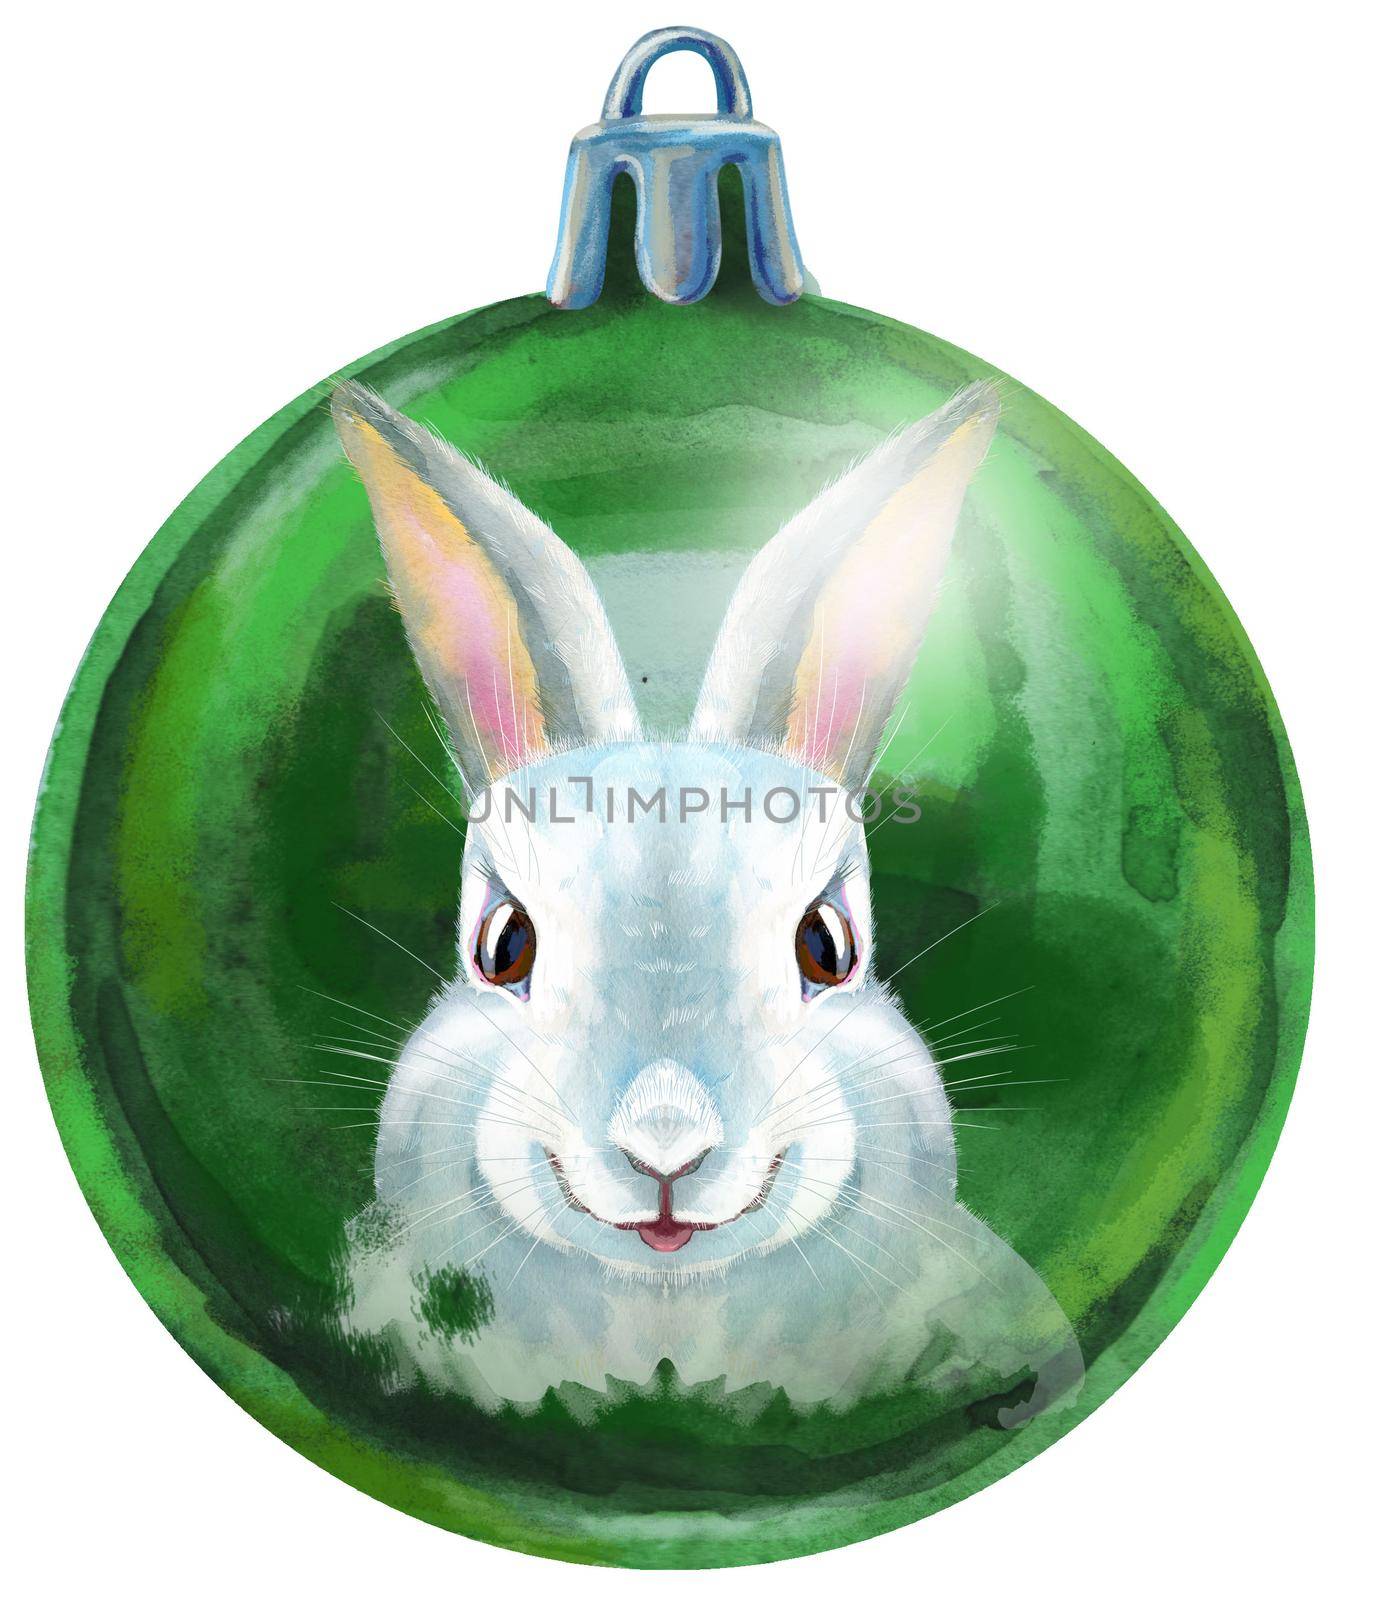 Watercolor green Christmas ball with white rabbit isolated on a white background. by NataOmsk